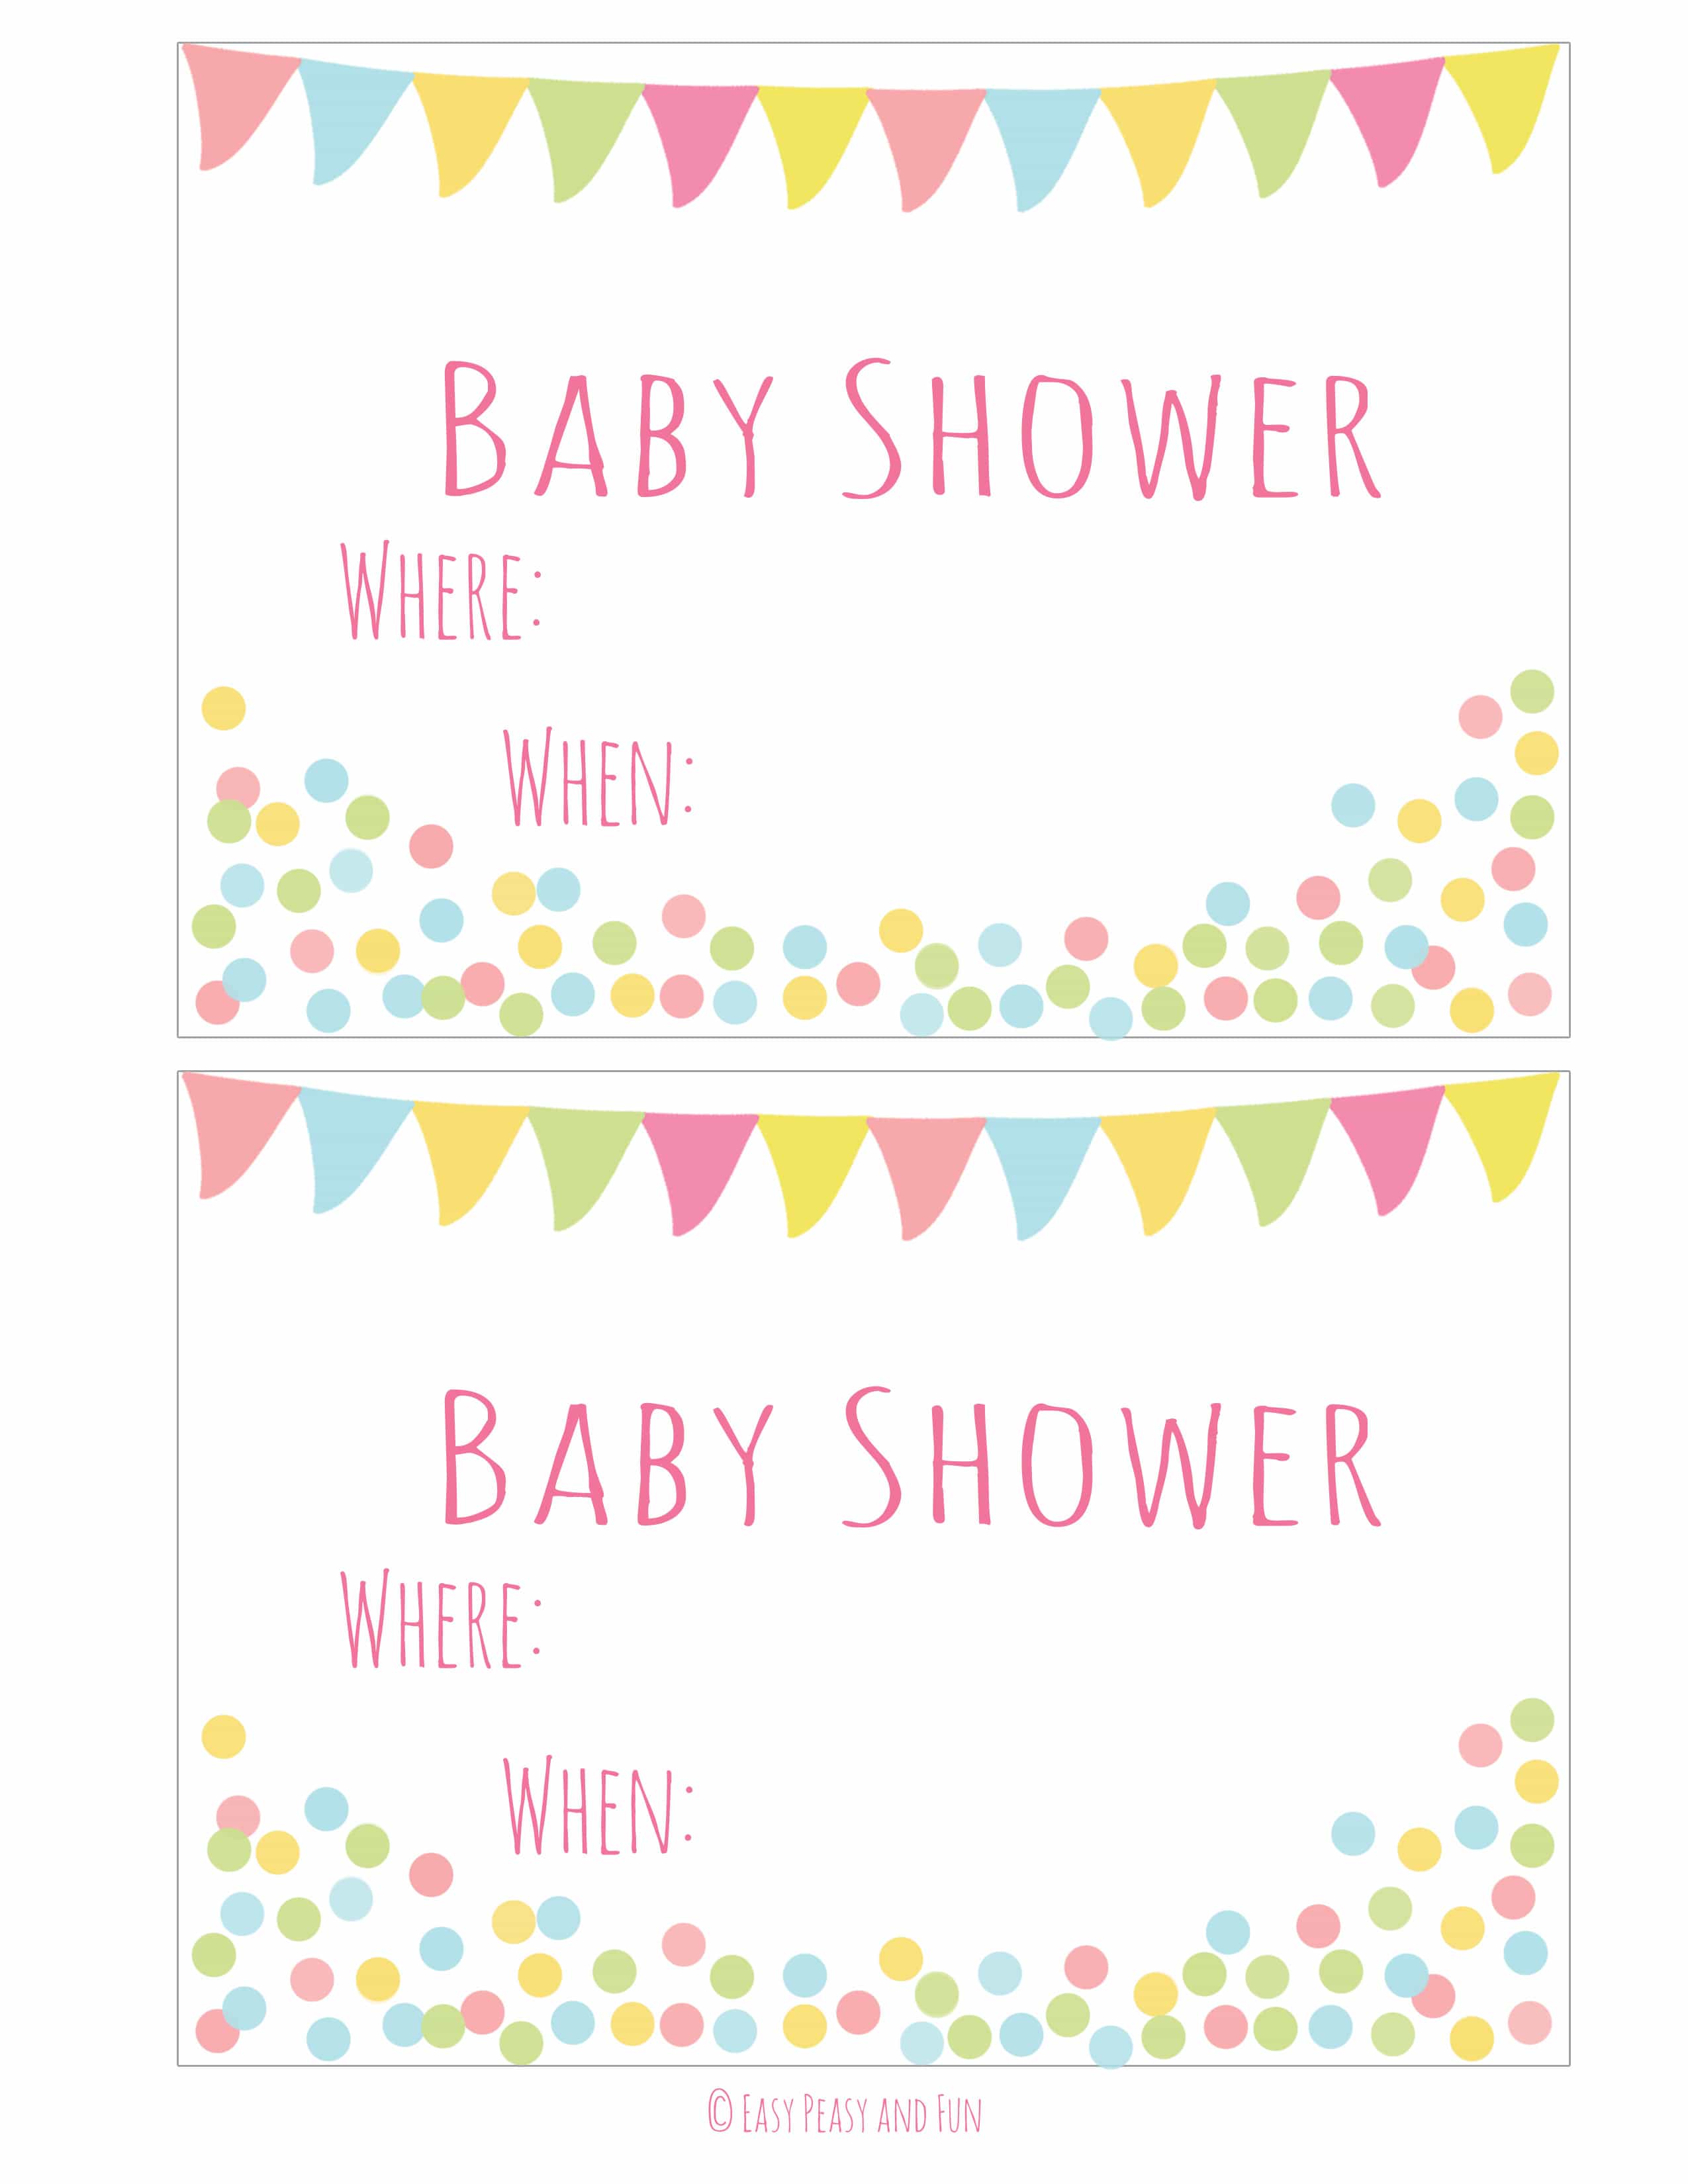 Free Printable Baby Shower Invitation Easy Peasy and Fun